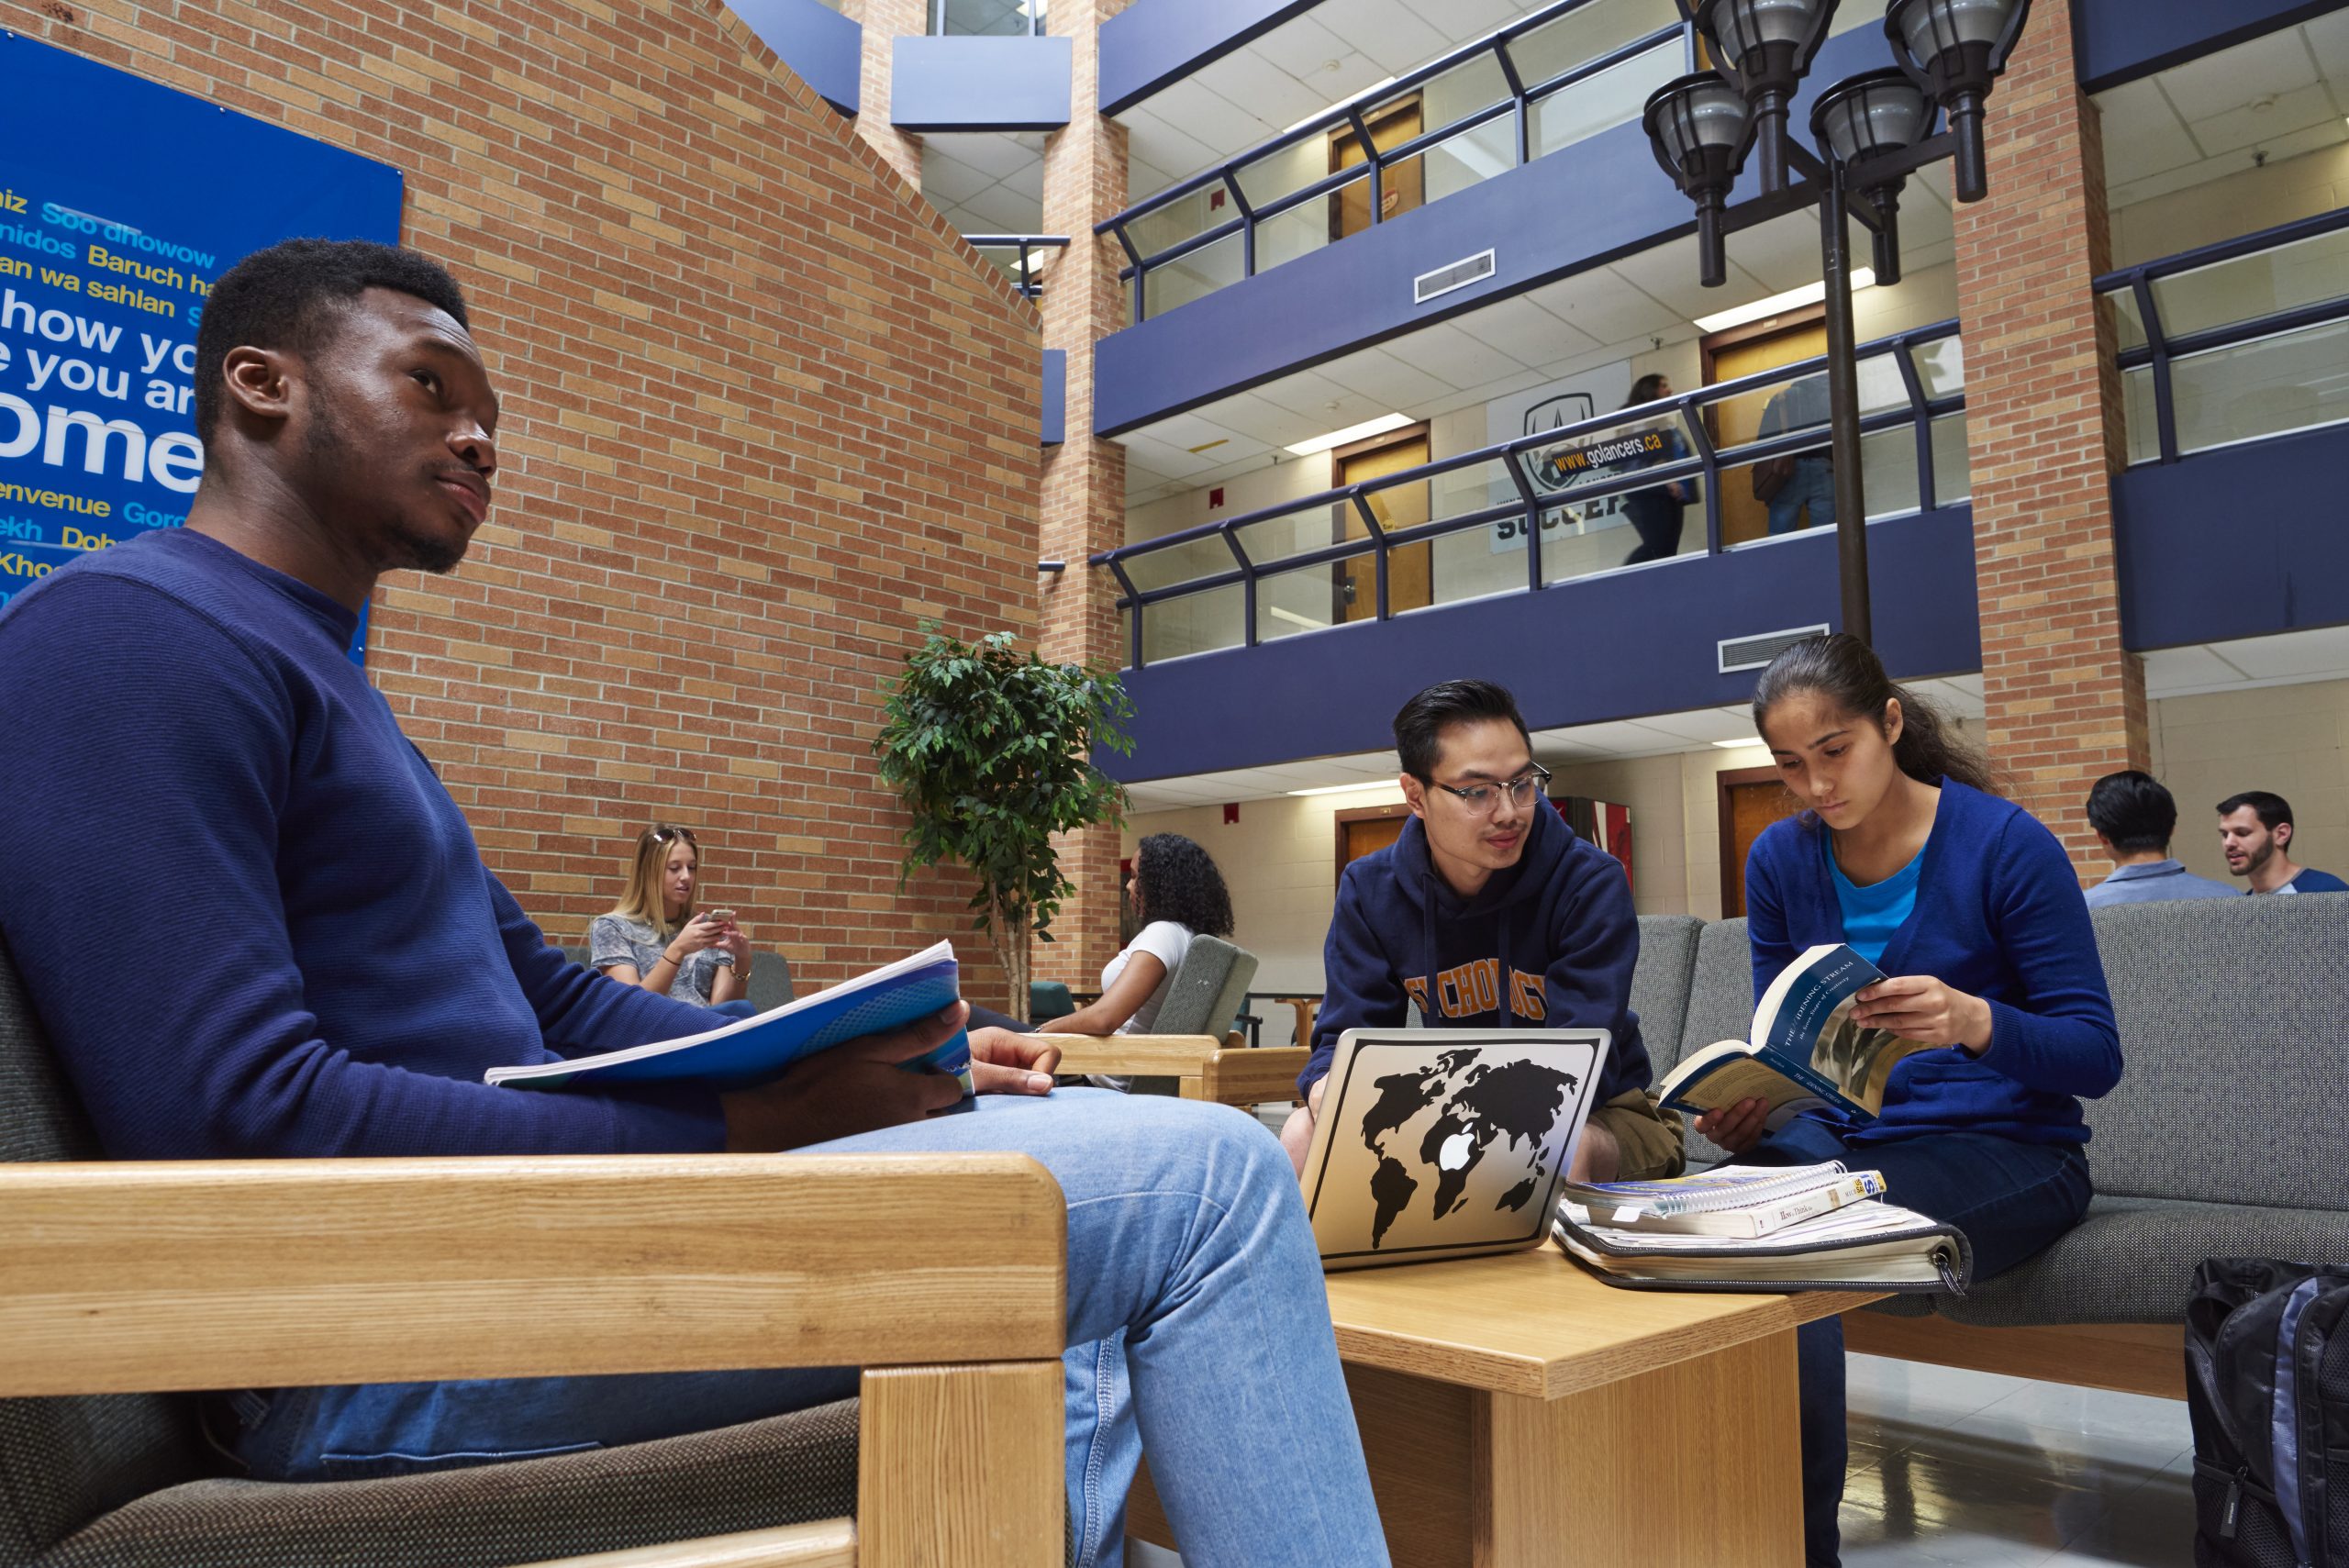 students sit together in a residence building on the University of Windsor campus